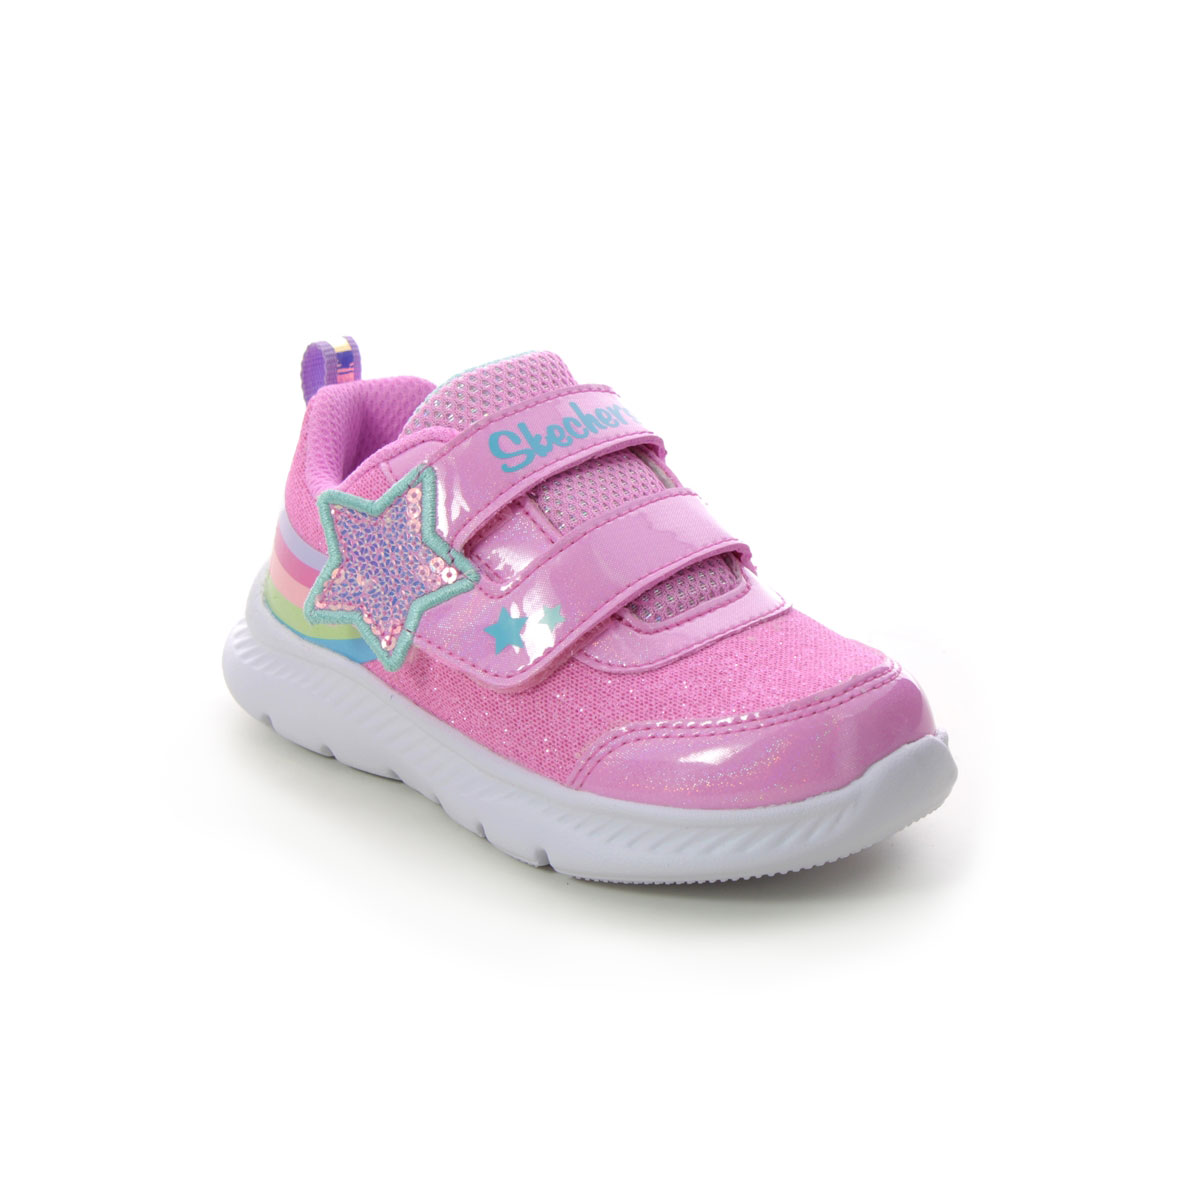 Skechers Comfy Flex Velcro Pink Kids Girls Trainers 302711N In Size 26 In Plain Pink For kids